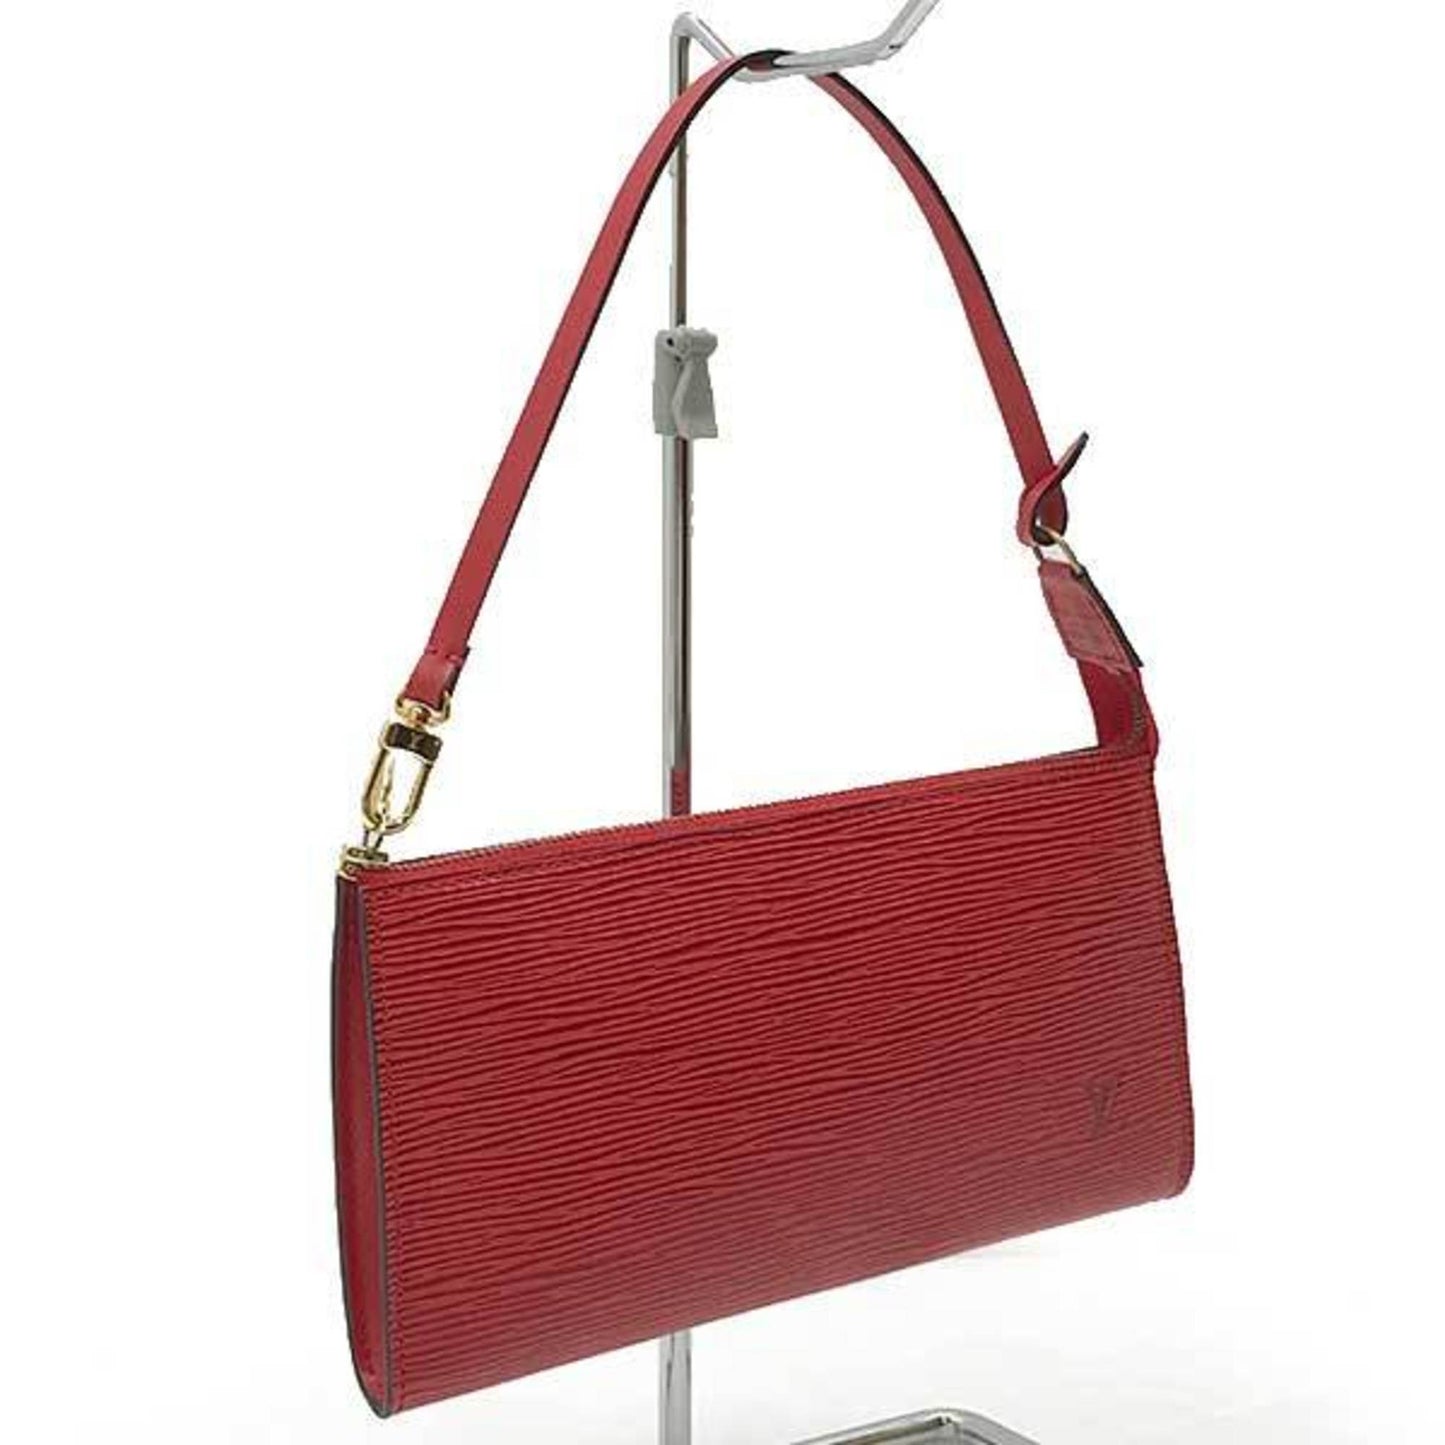 Louis Vuitton Women's Epi Leather Clutch Bag with Serial Number - Excellent Condition in Red